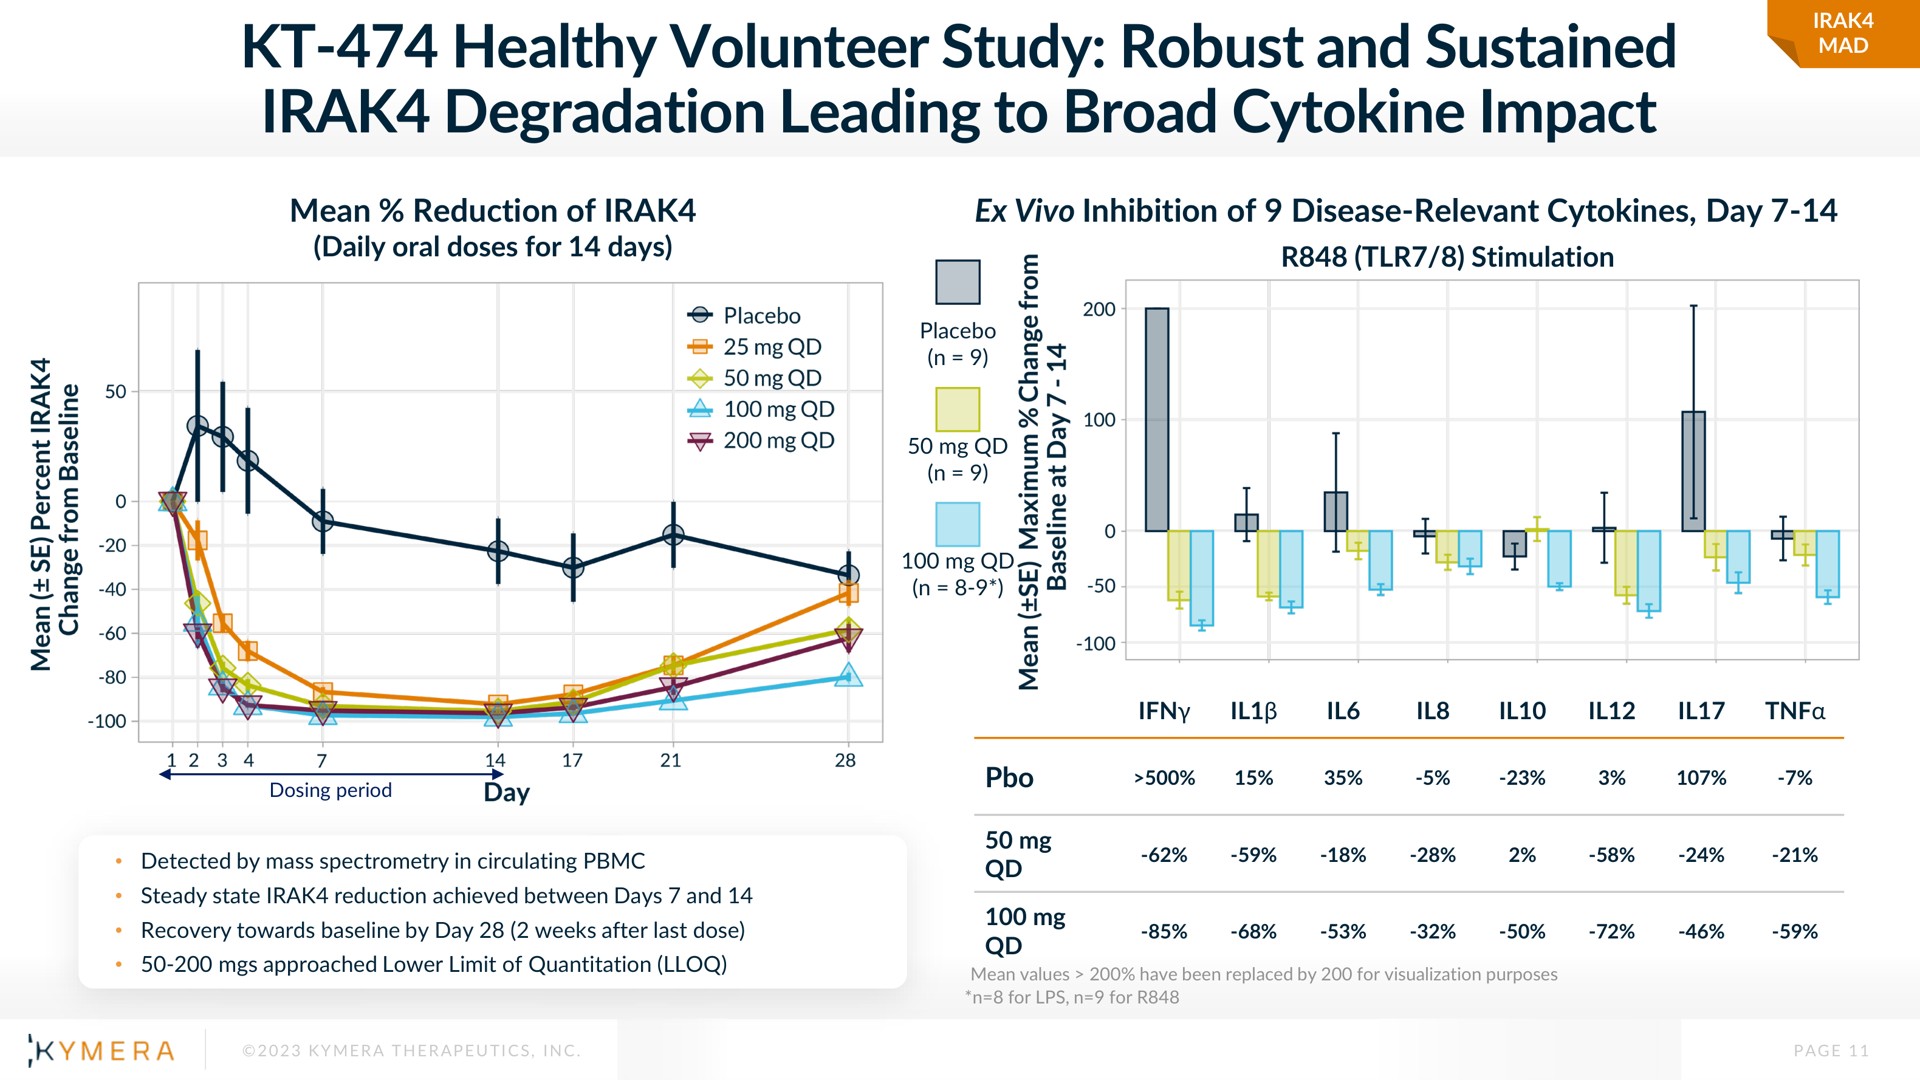 healthy volunteer study robust and sustained degradation leading to broad impact | Kymera